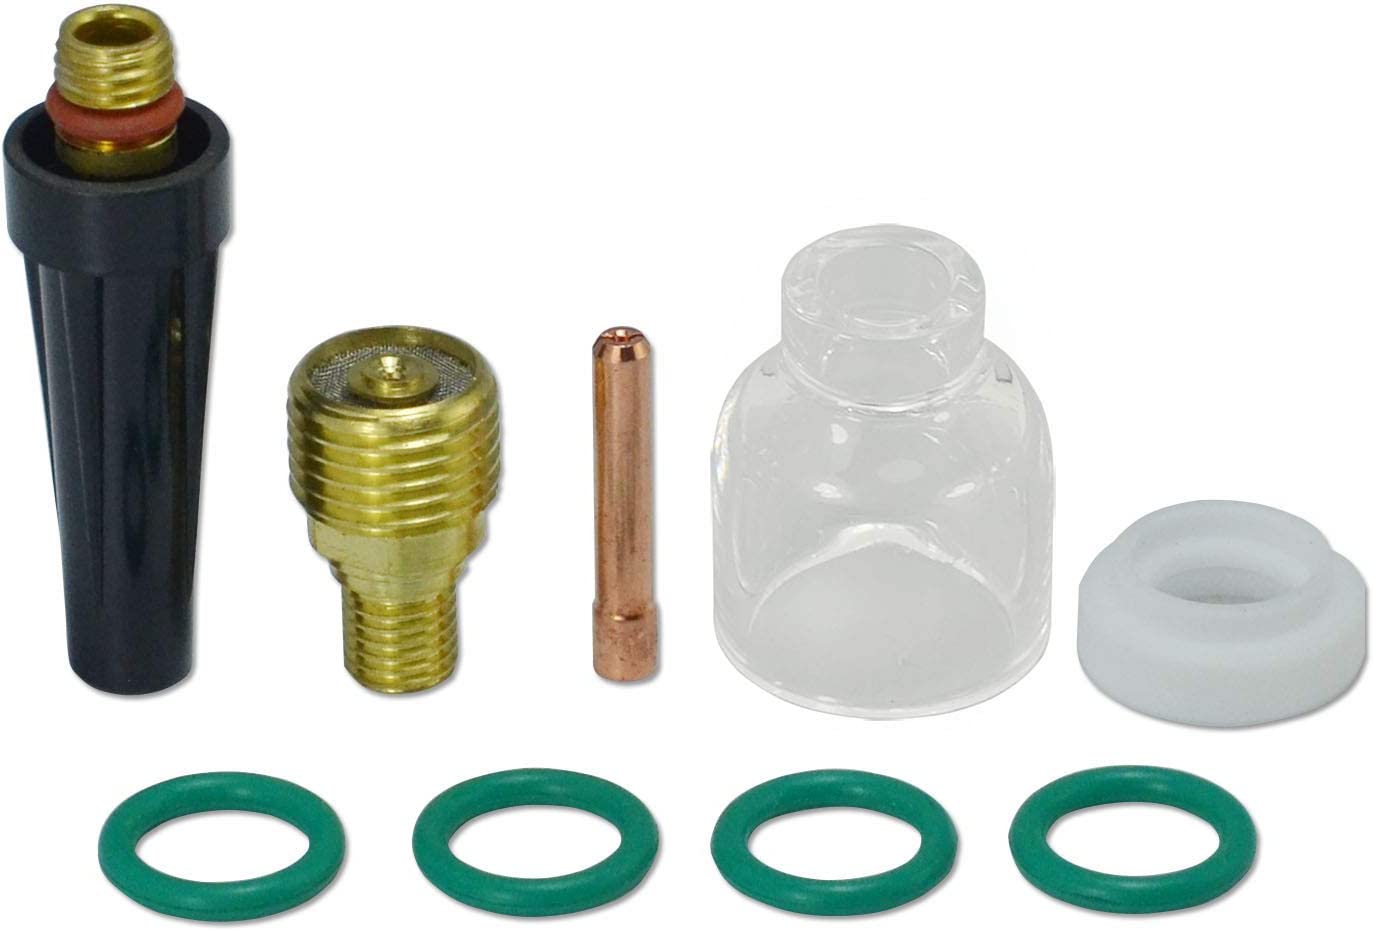 TIG Gas Lens Collet Body 45V42 (0.040" & 1.0mm Orifice) 13N21 & Glass Cup #5 5/16“ and Insulators Cup Gaskets 598882 Assorted size Kit for DB SR WP 9 20 25 TIG Welding Torch 9pcs